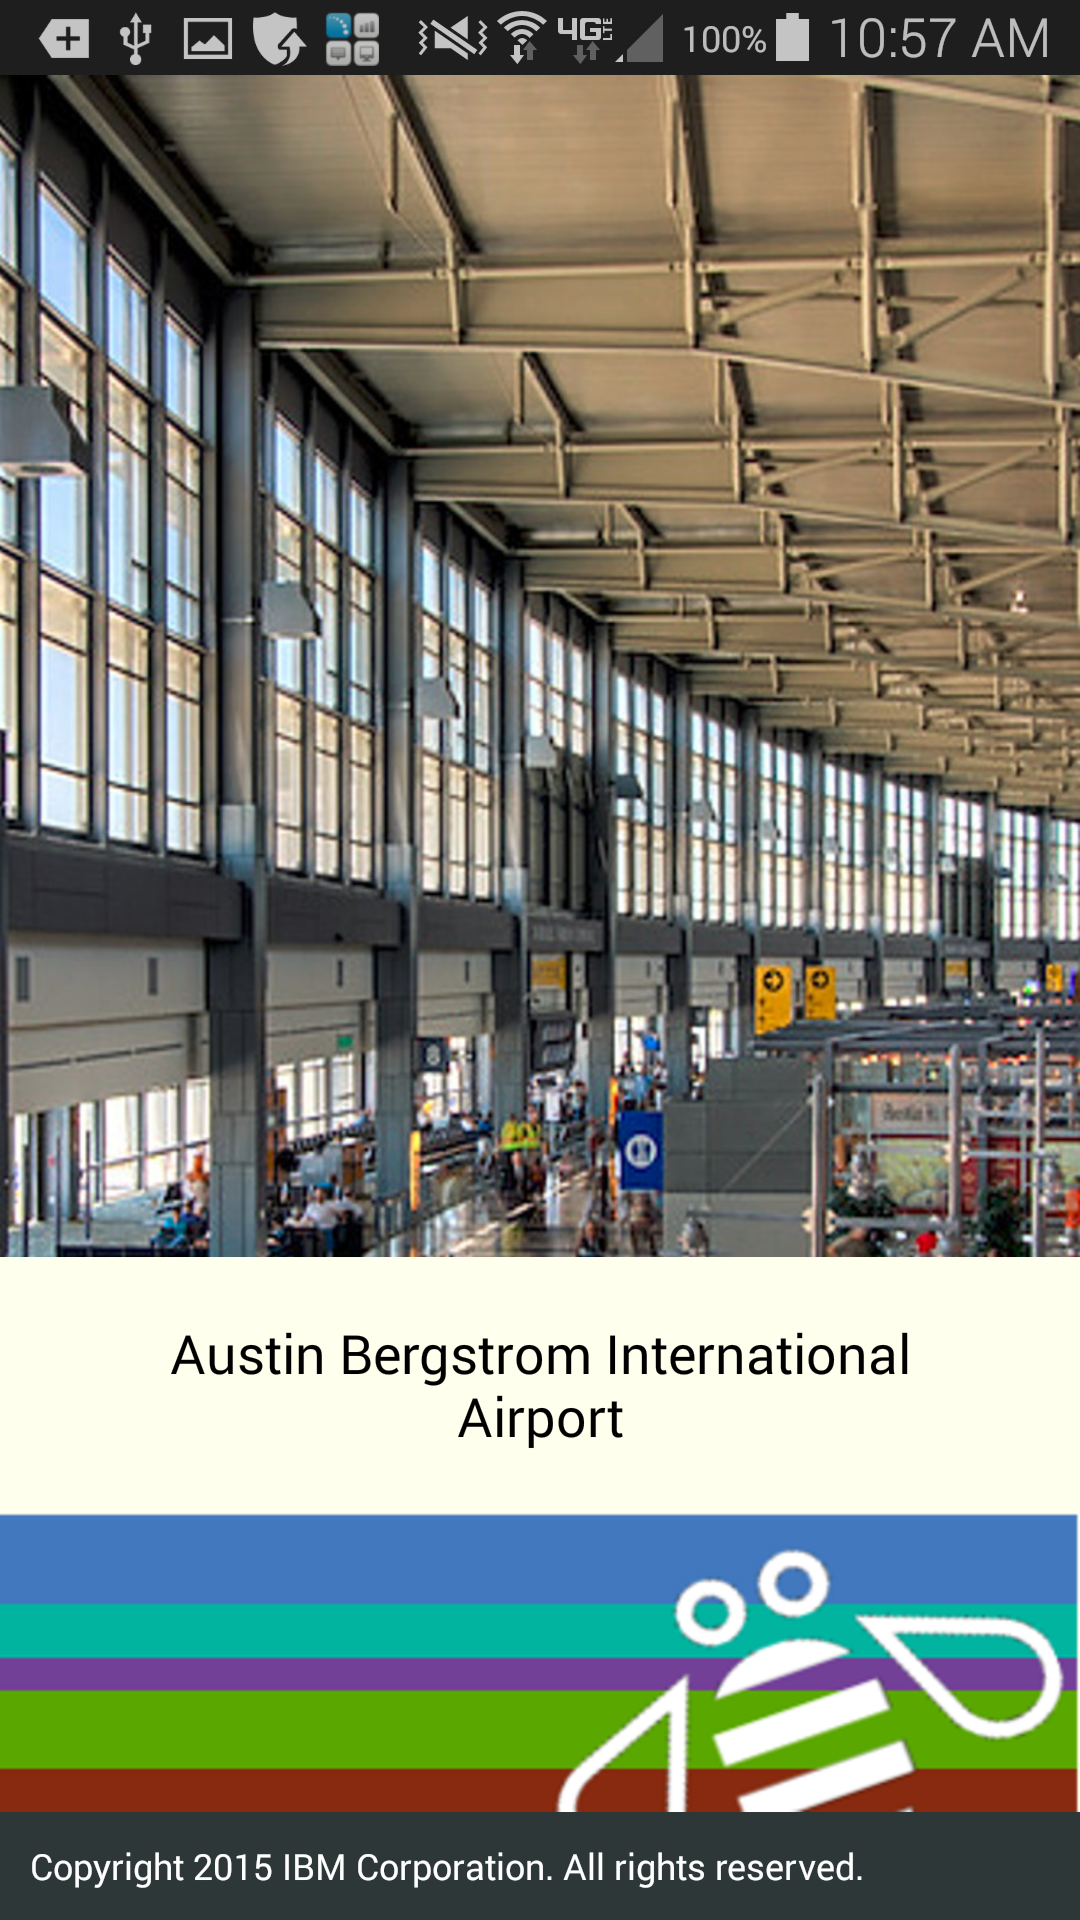 Screenshot of loading screen from IBM Accessible Airport App